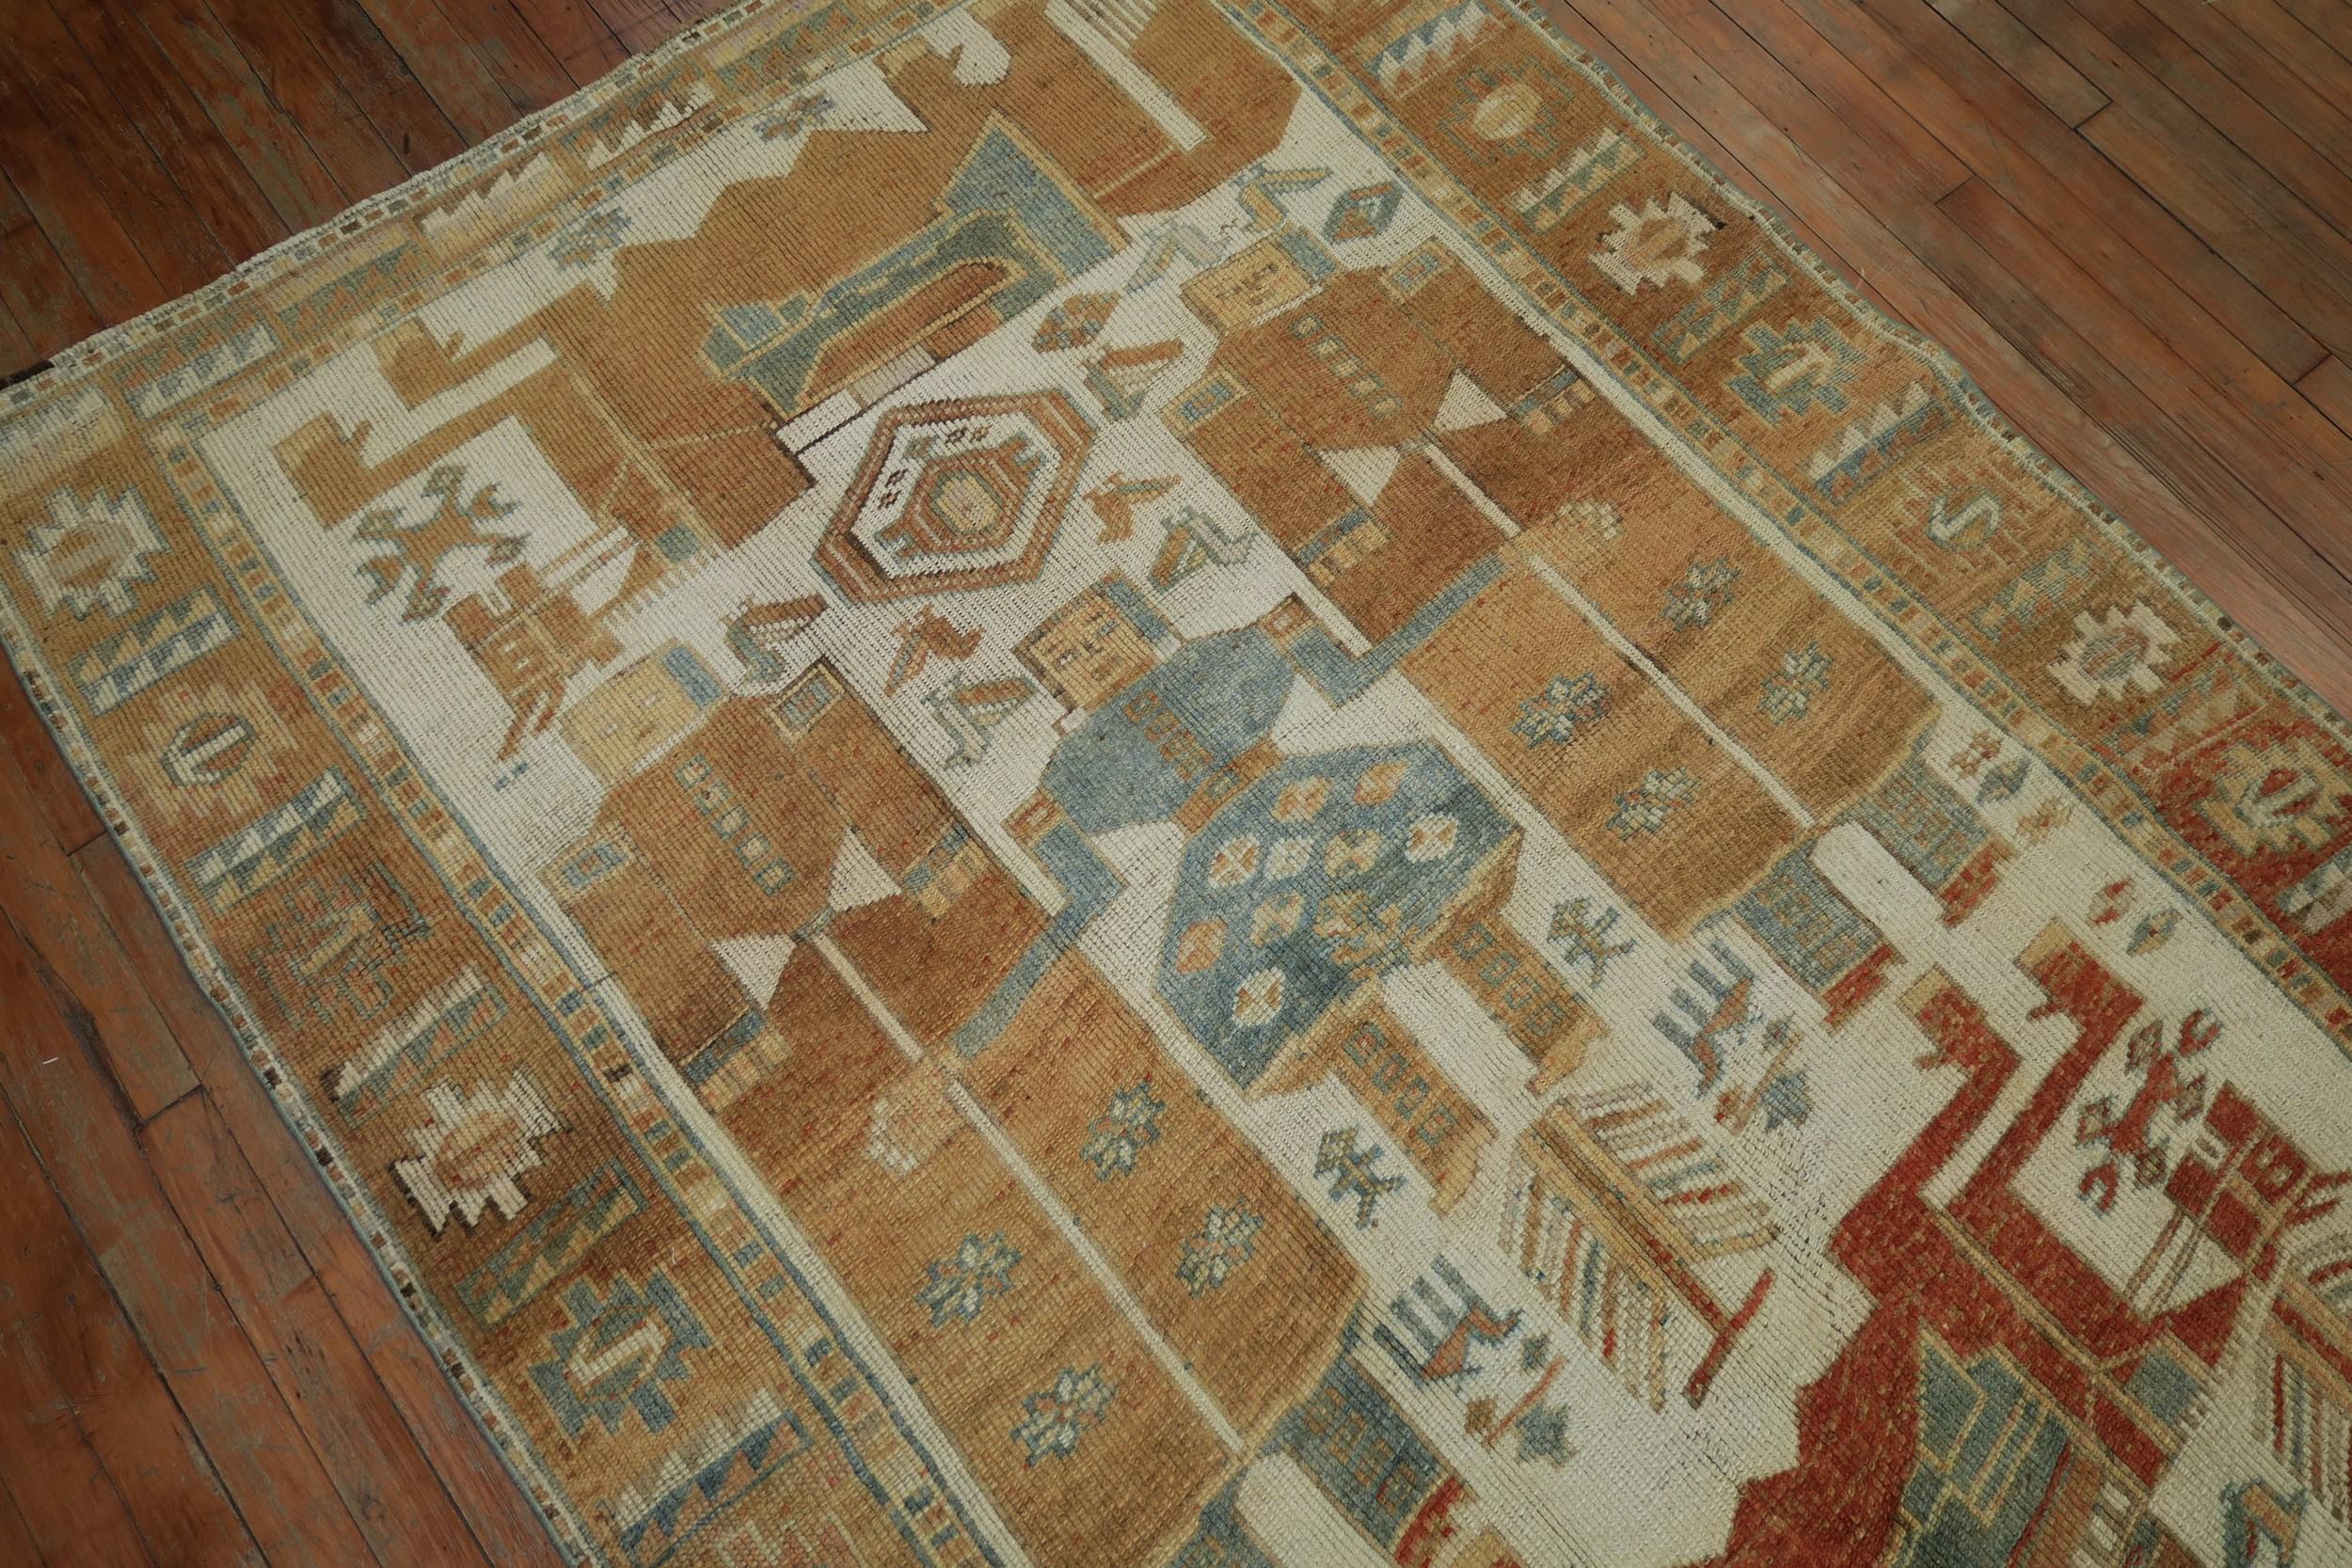 Gallery size antique Persian Balouch pictorial rug from the 1940s. Ivory field with apricot and teal accents

Size: 4'10” x 10'8”.